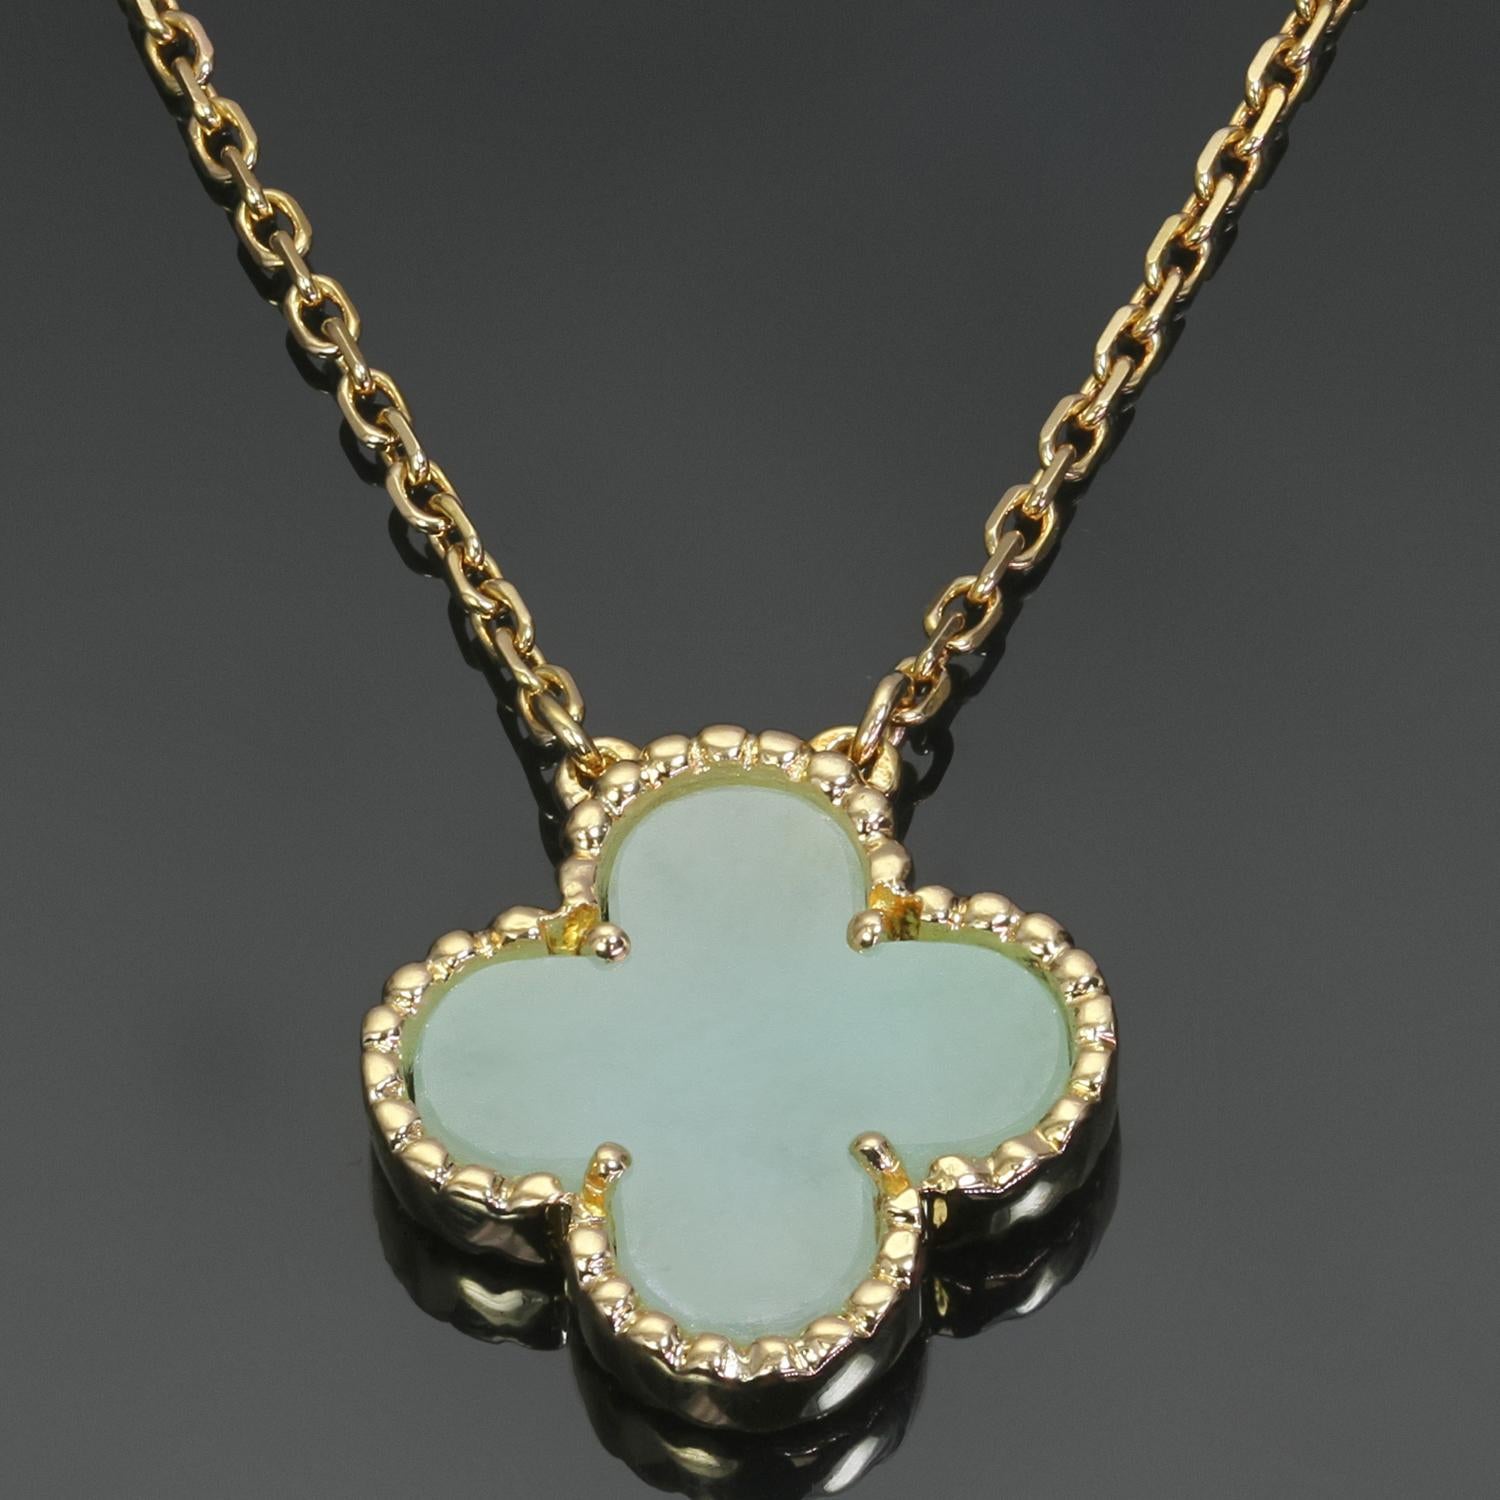 This rare necklace from Van Cleef & Arpels's iconic and festive Vintage Alhambra collection features a green jade lucky clover pendant set in 18k yellow gold completed with an adjustable chain with a length of 15 to 16.75 inches. Made in France